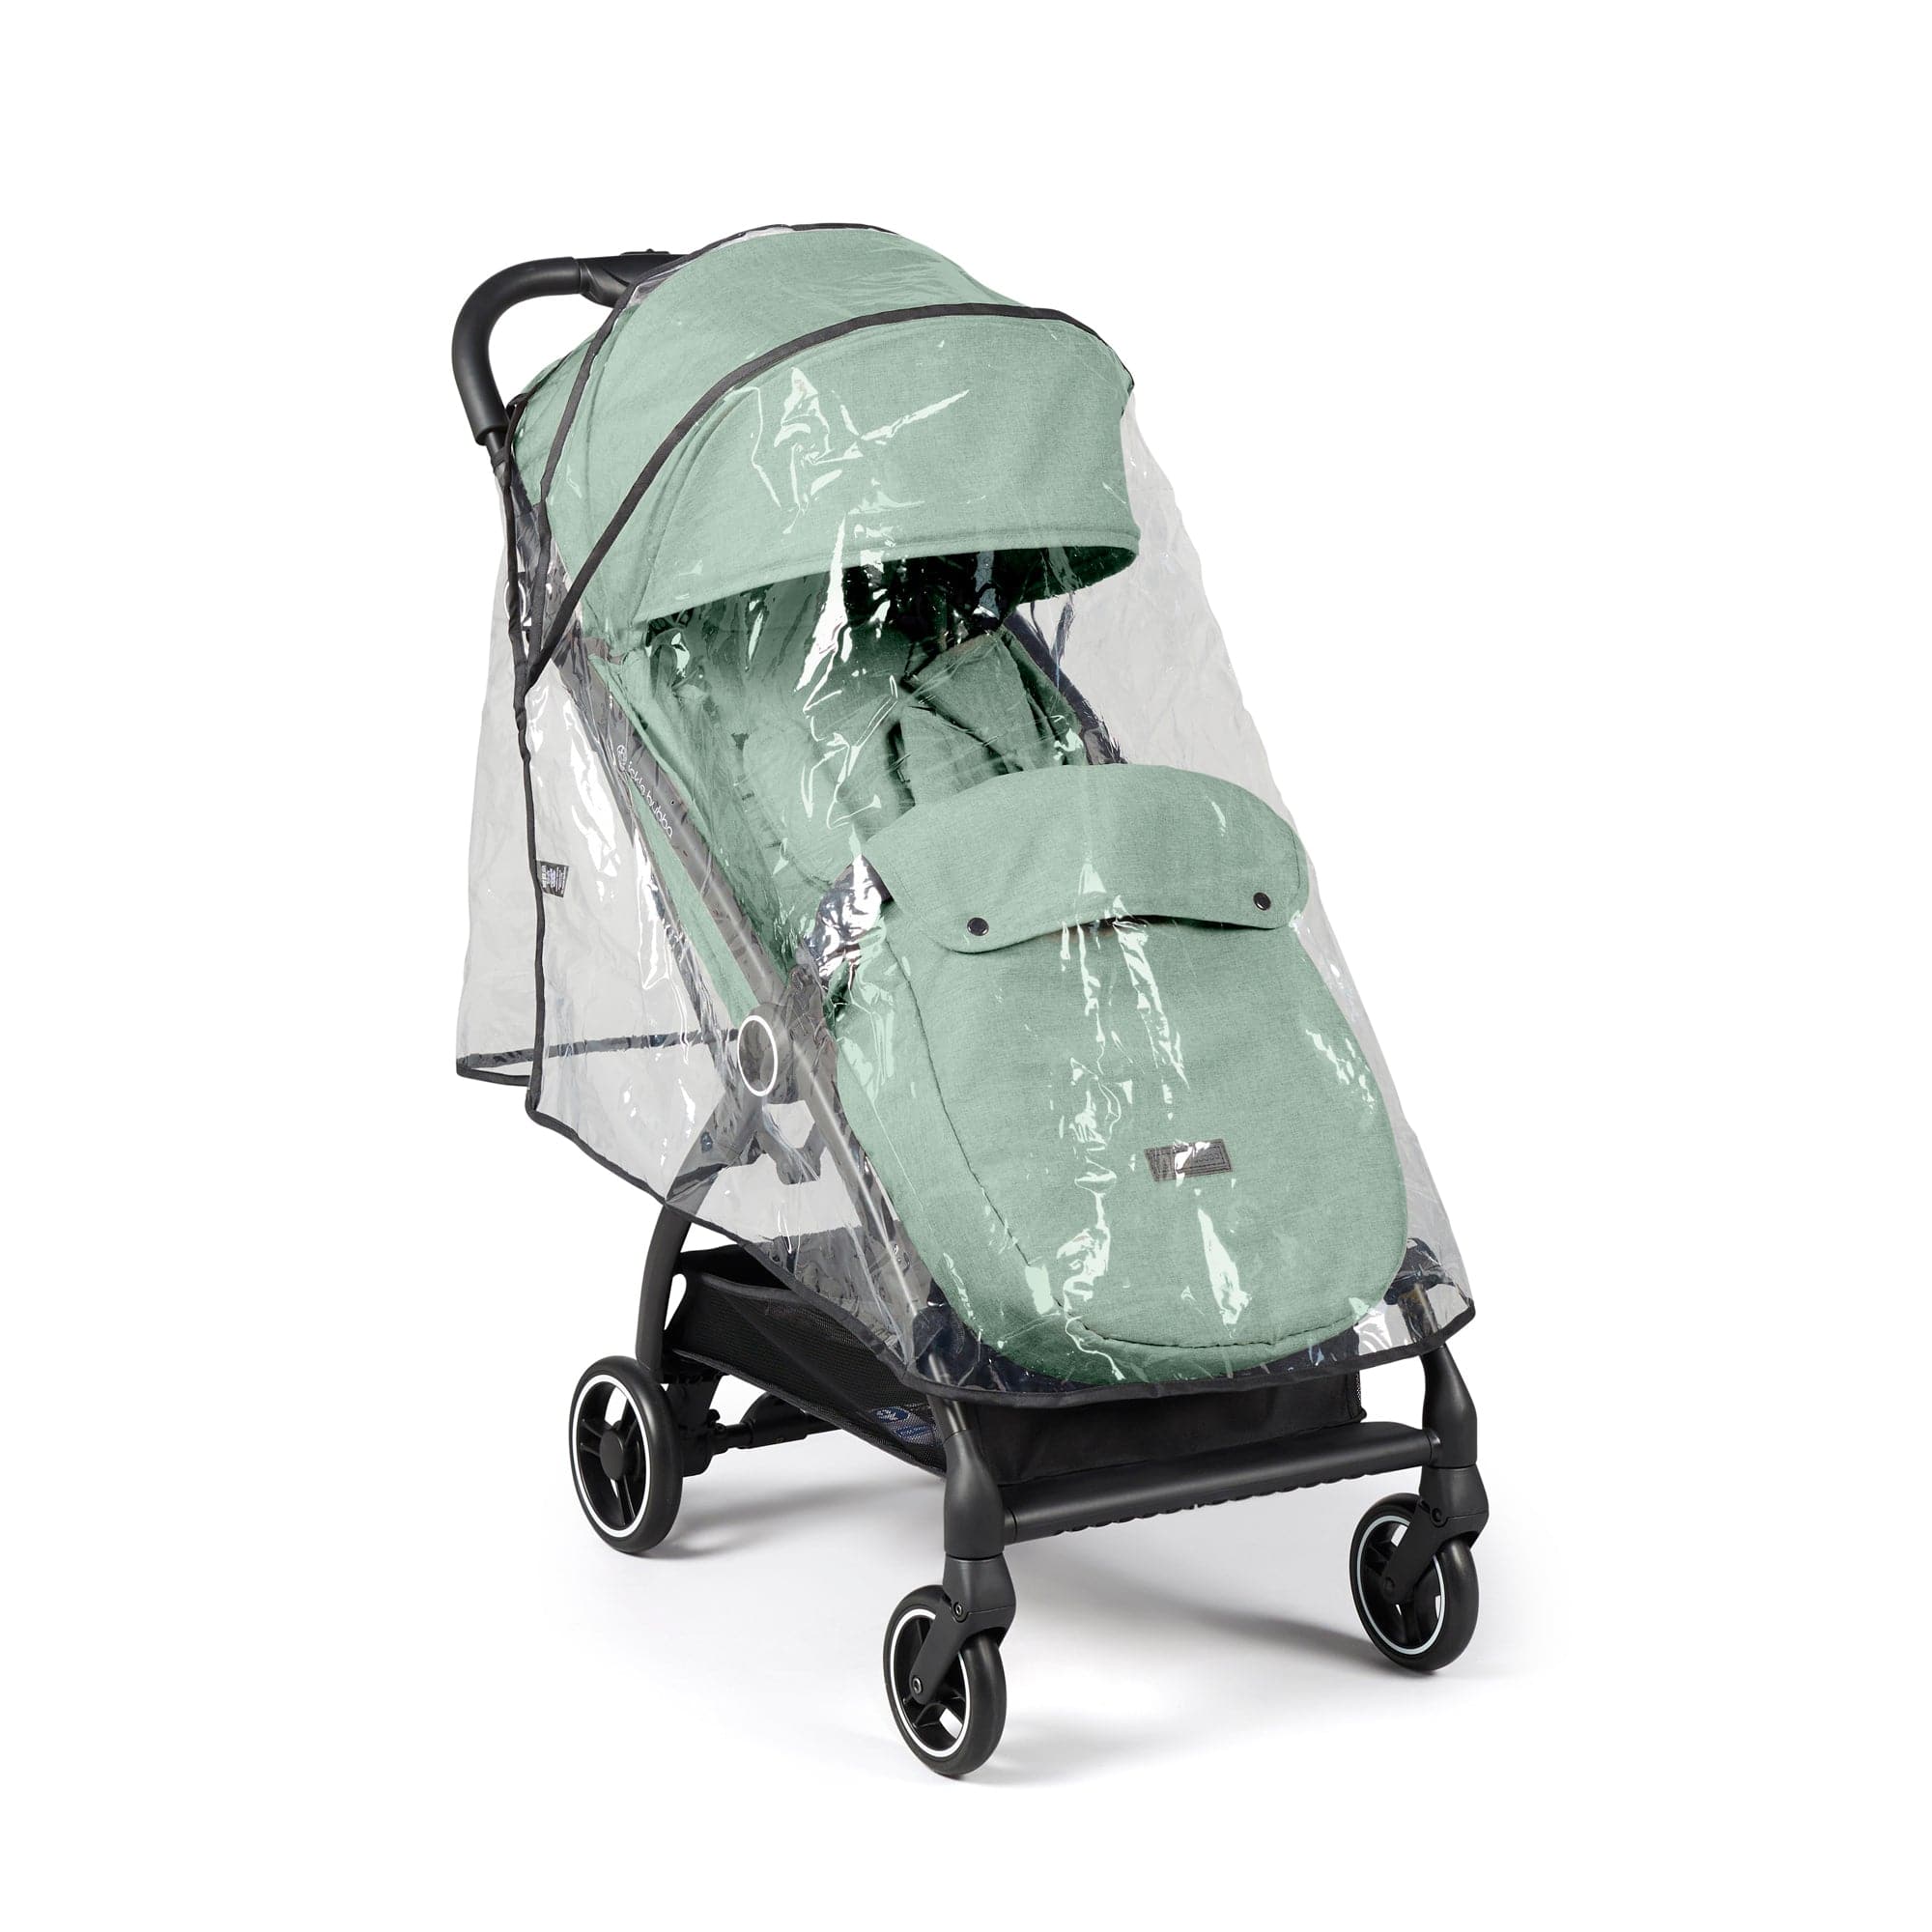 Ickle Bubba baby pushchairs Ickle Bubba Aries Max Autofold Stroller - Sage Green 15-005-200-152